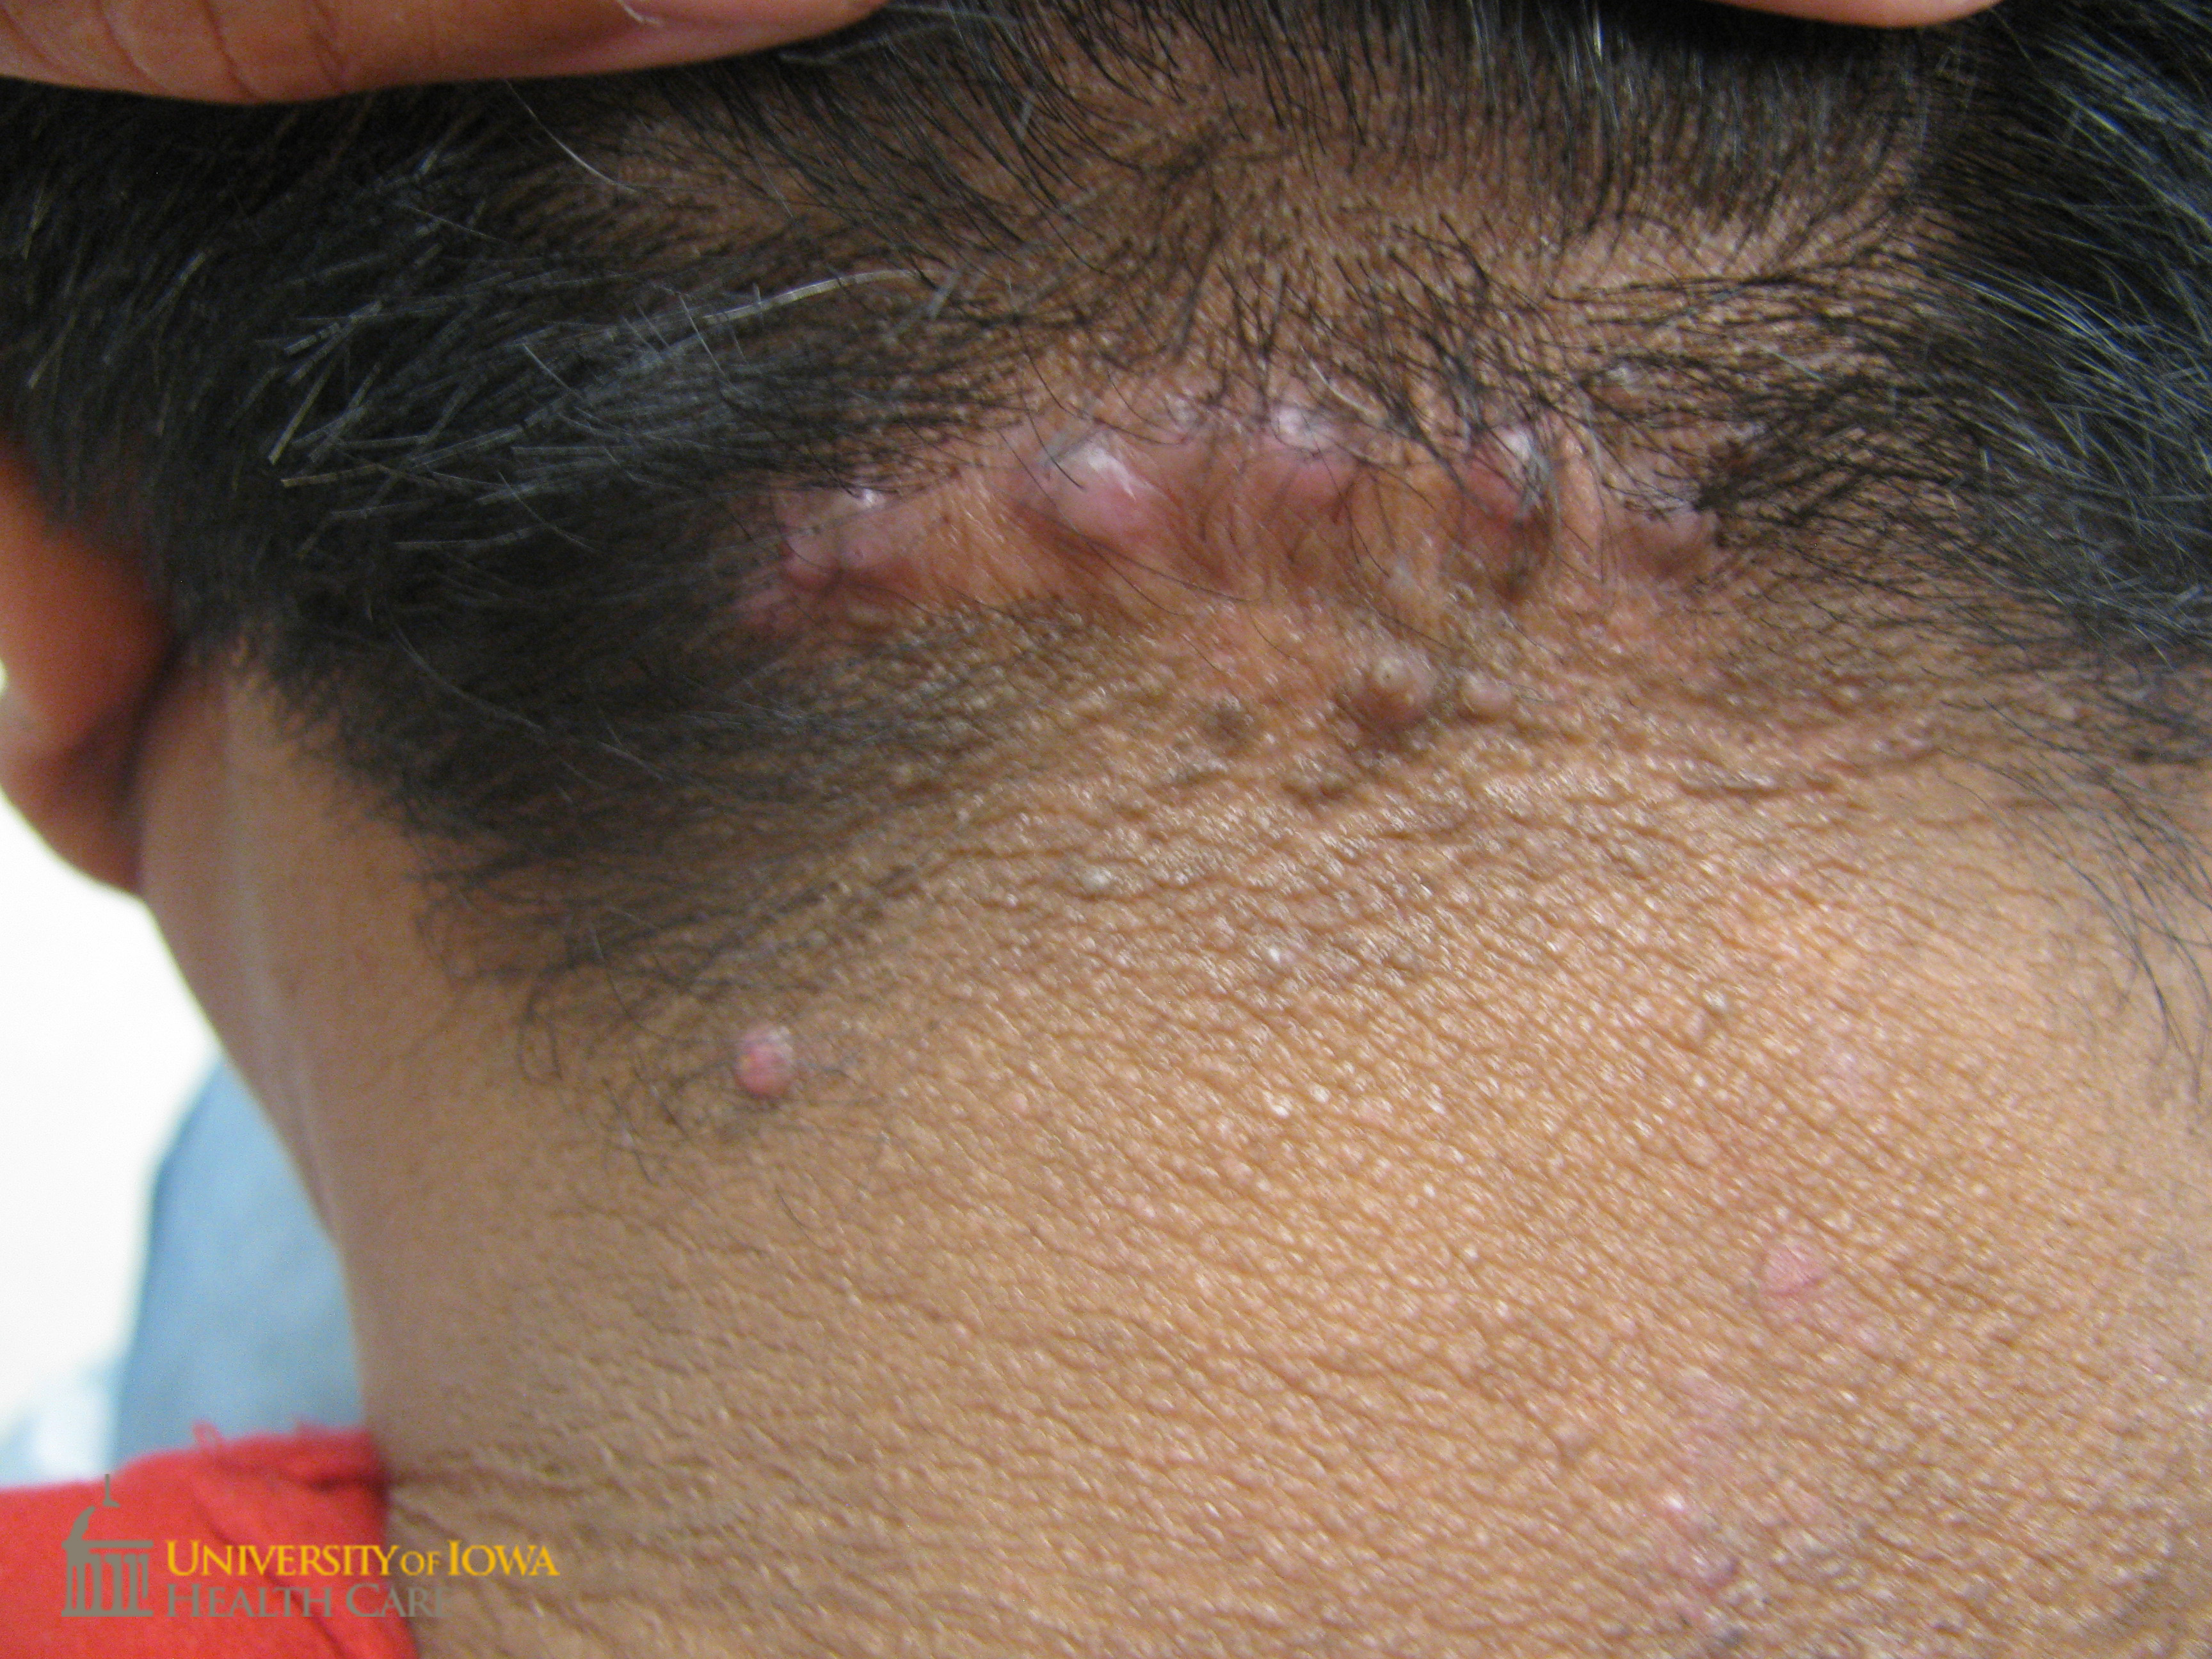 pink keloidal papules coalescing into a plaque on the occipital scalp. (click images for higher resolution).